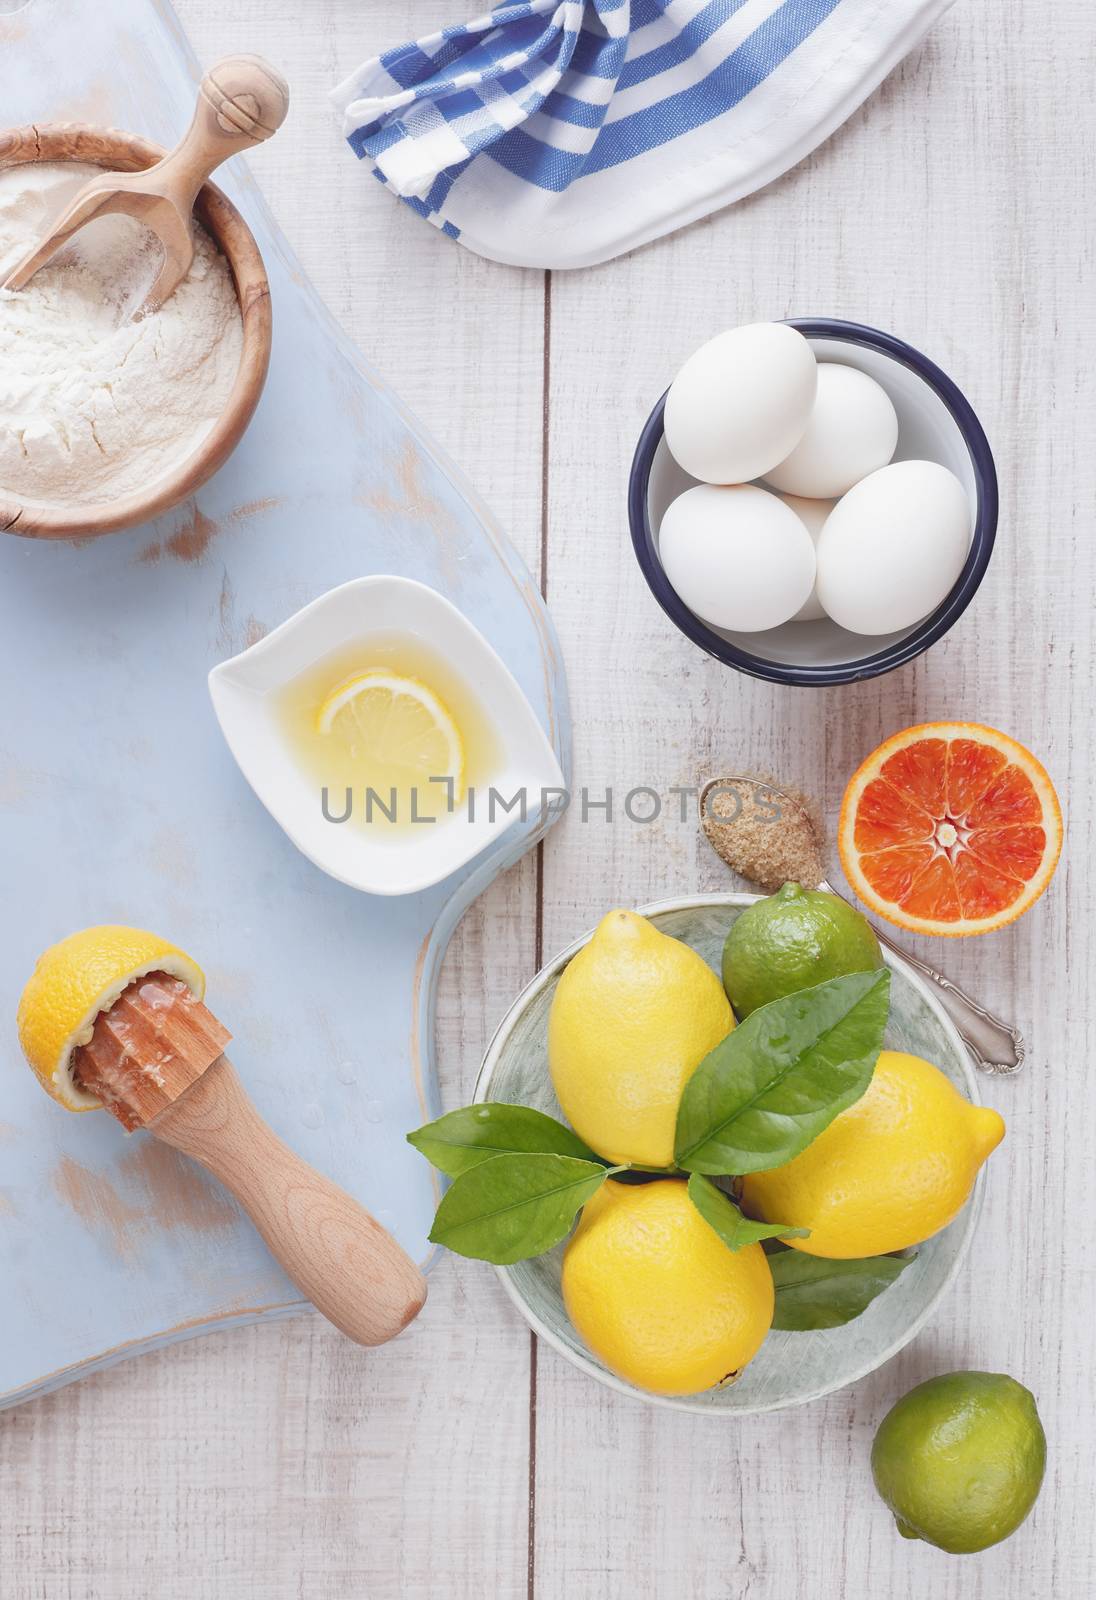 Ingredients for lemon and orange pie on wooden table, vintage style, top view. Natural light